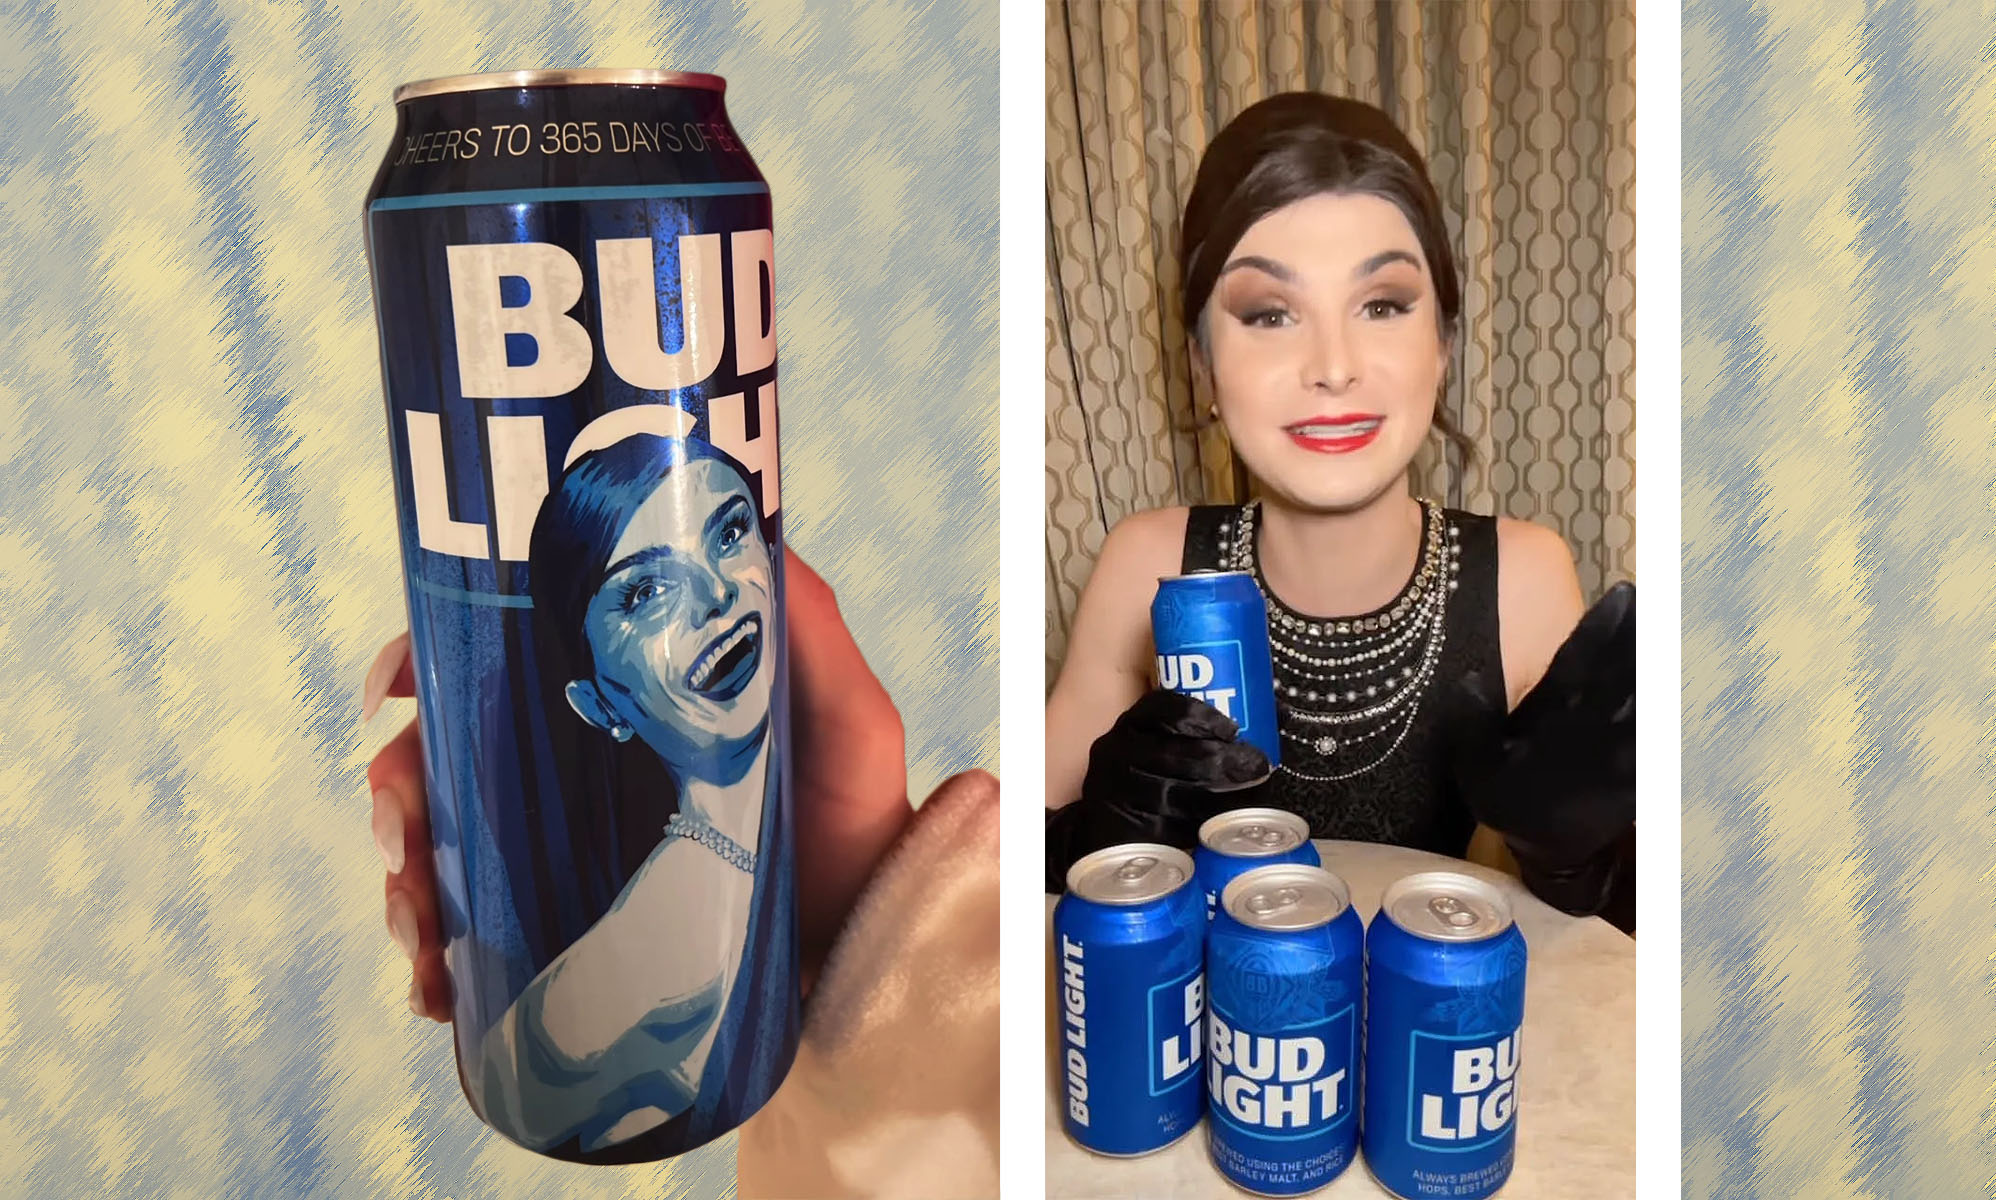 Ted Cruz demands 'investigation' into Bud Light's collab with Dylan